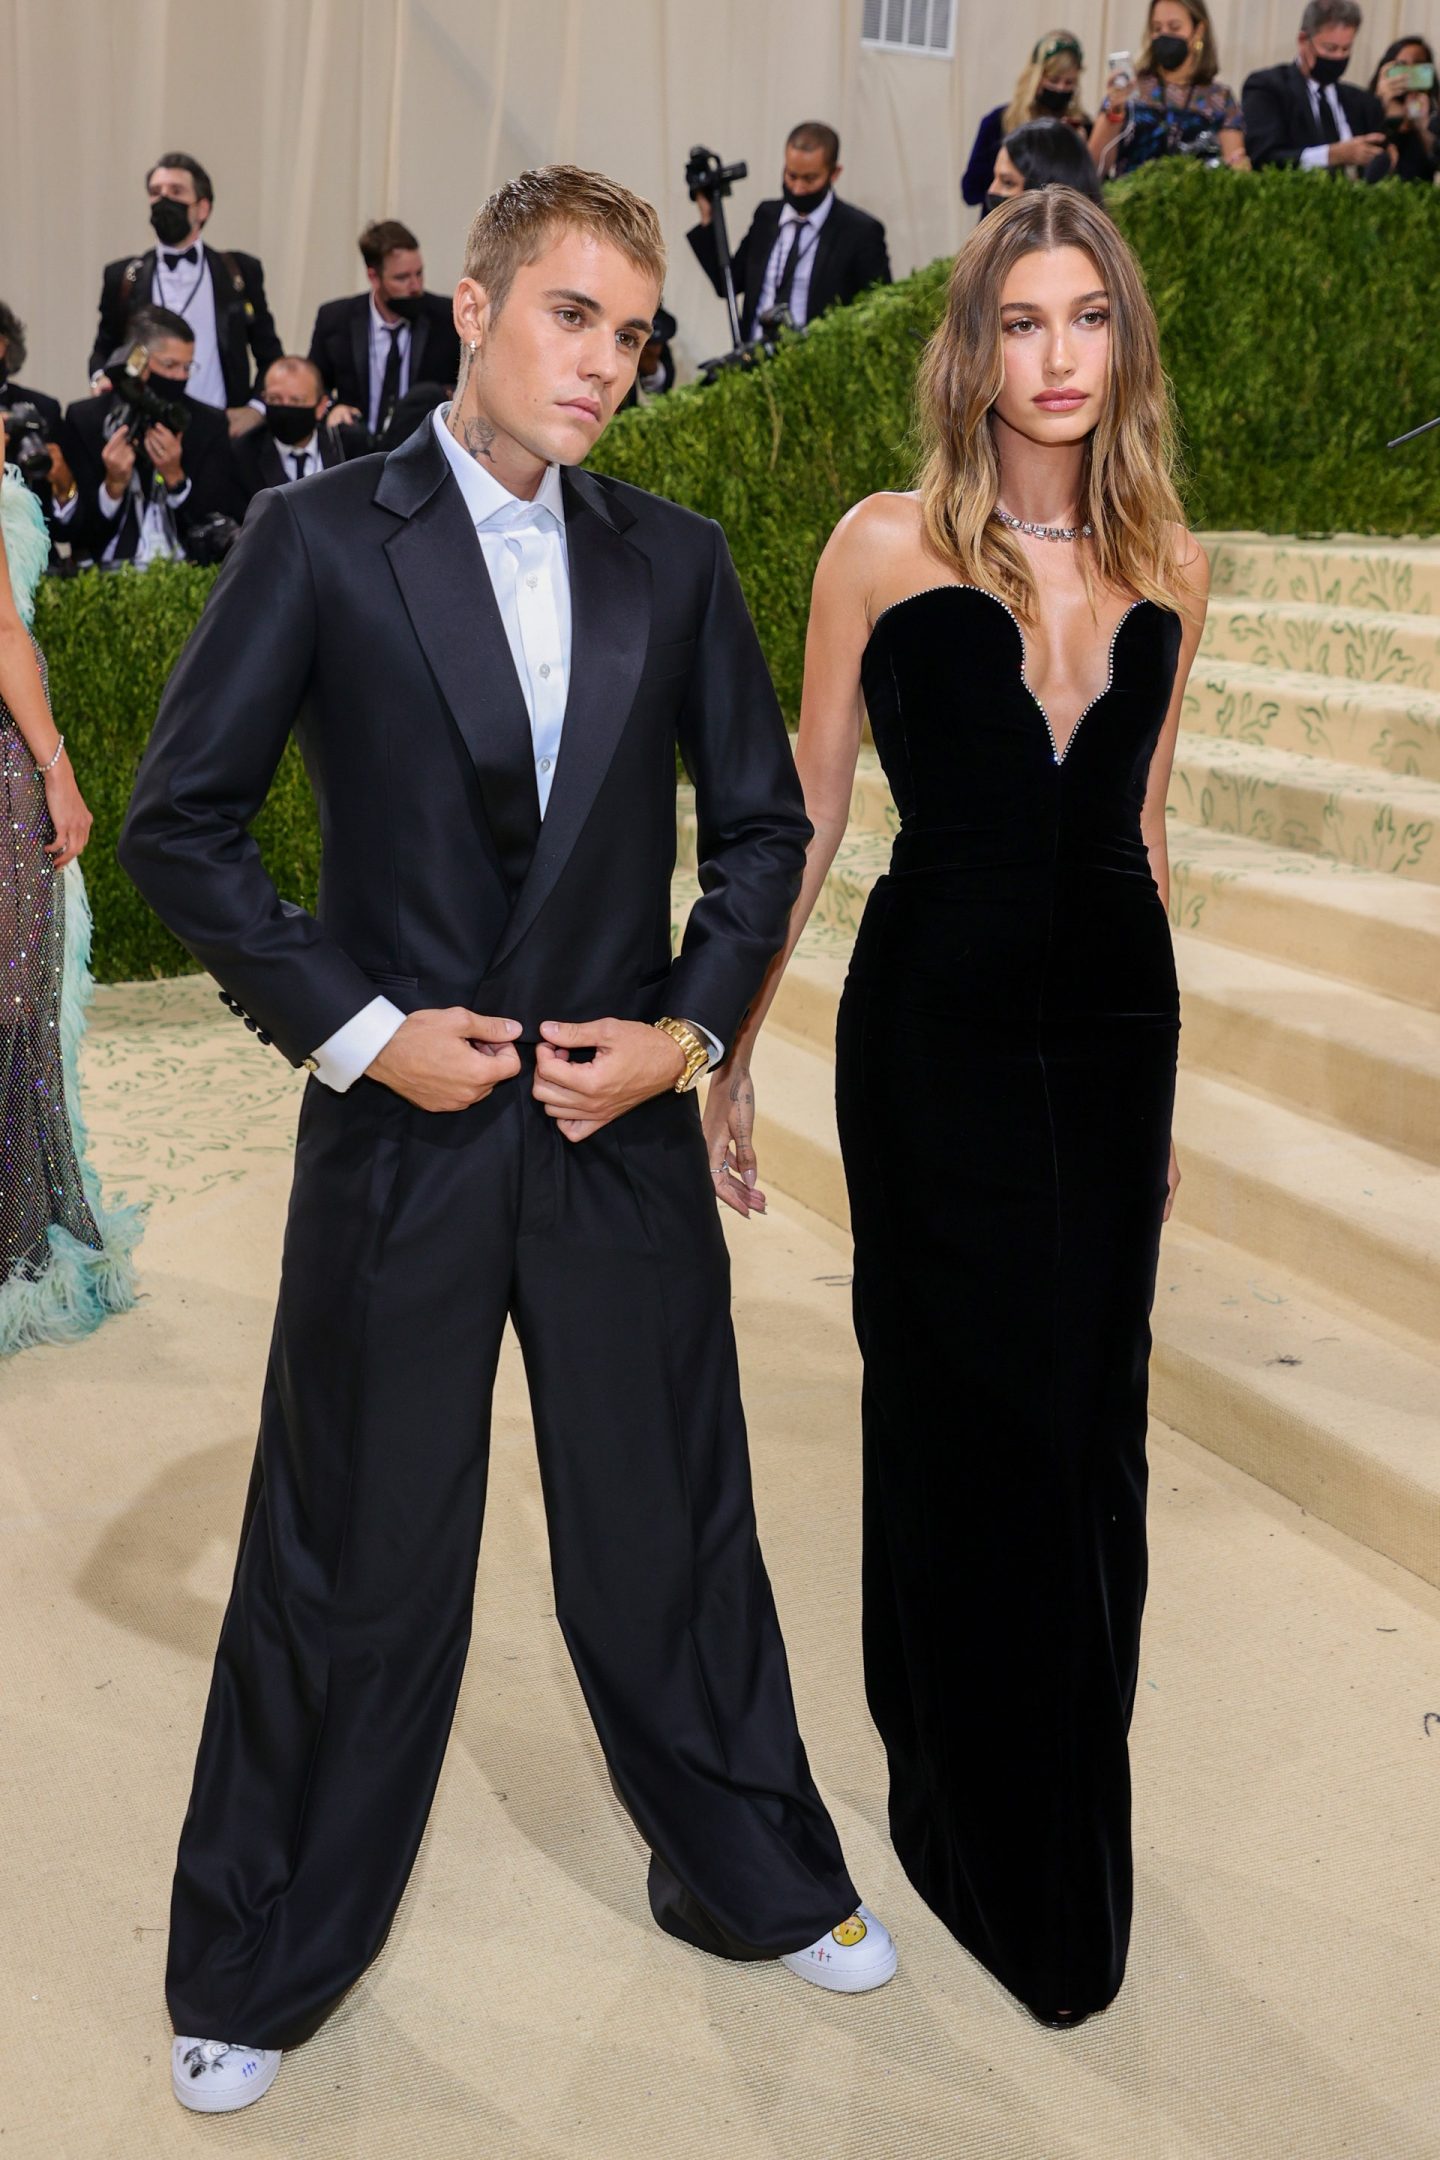 Justin and Hailey Bieber Met gala 2021 outfits